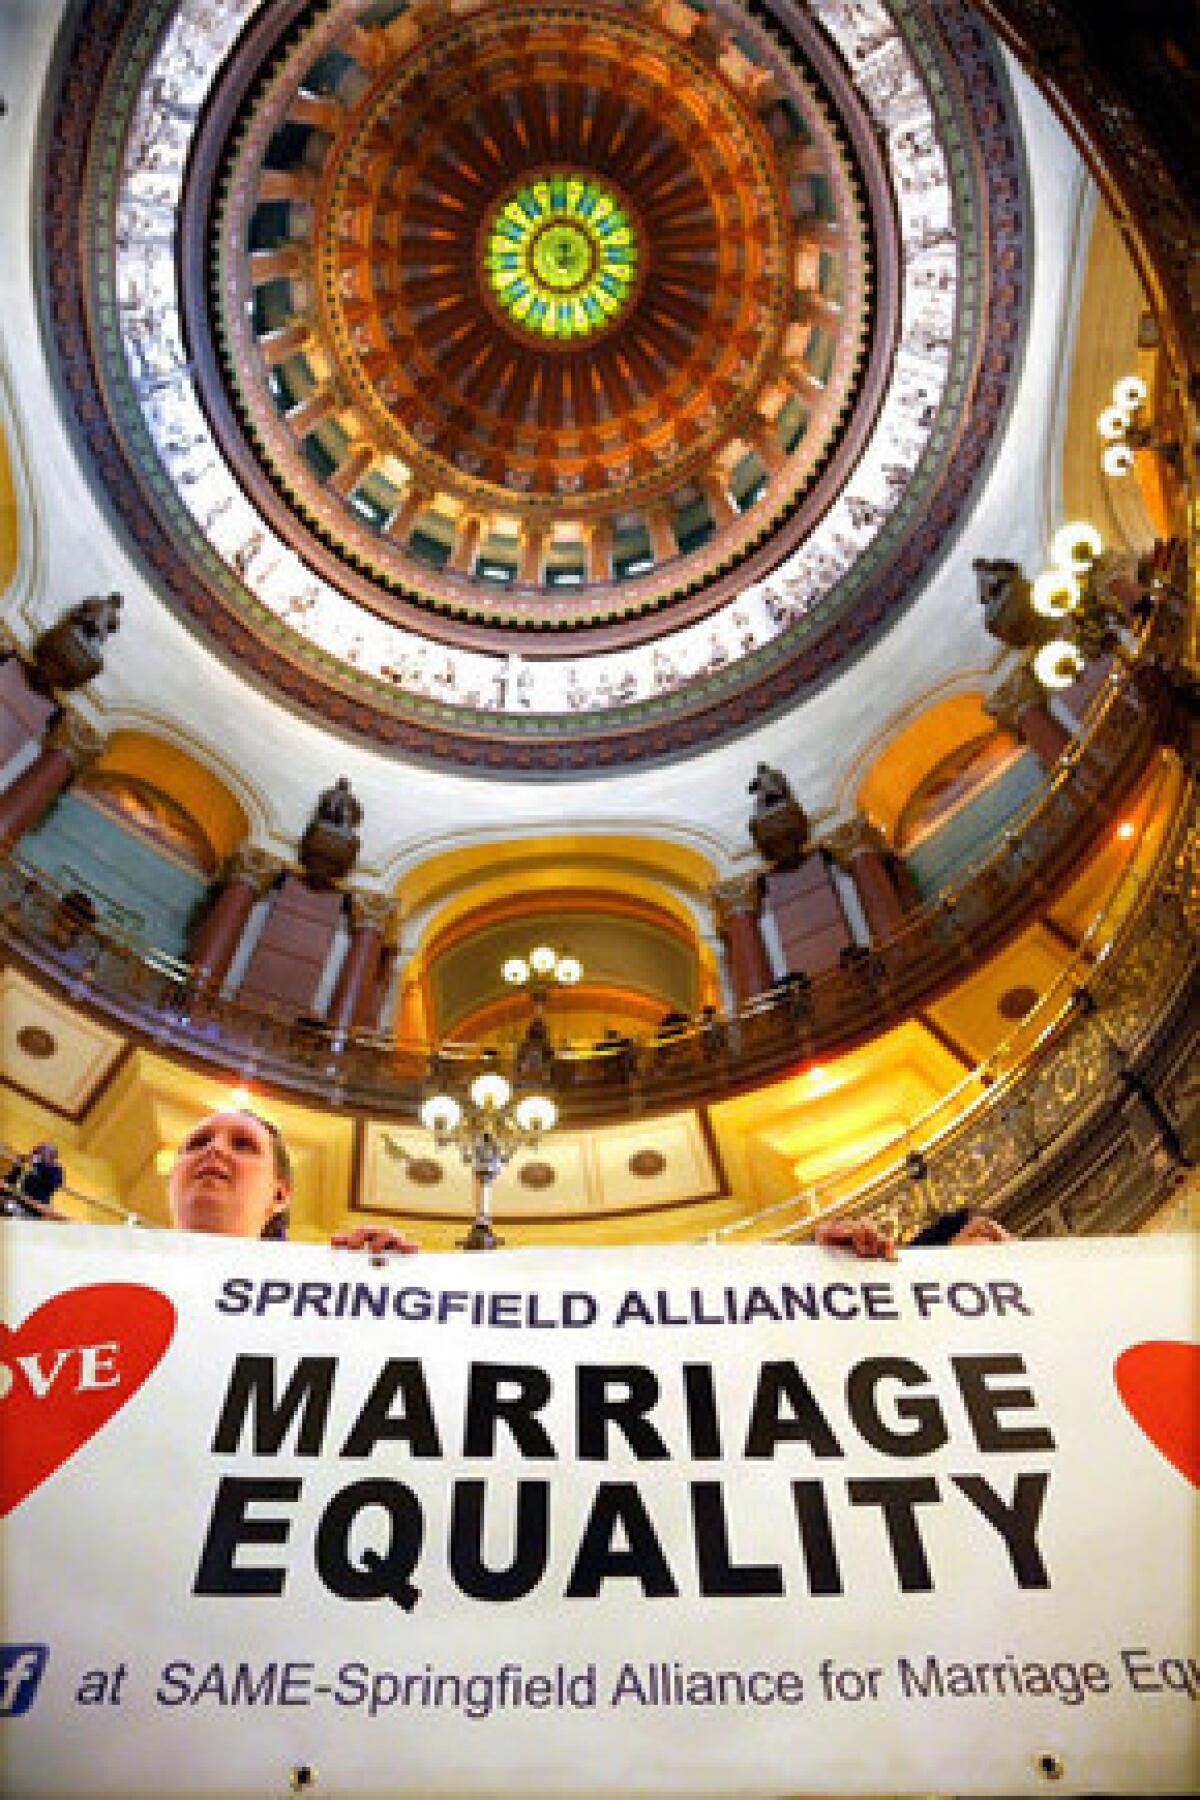 Supporters of same sex marriage legislation rally in the rotunda at the Illinois State Capitol on Tuesday, Nov. 5, 2013 in Springfield Ill.